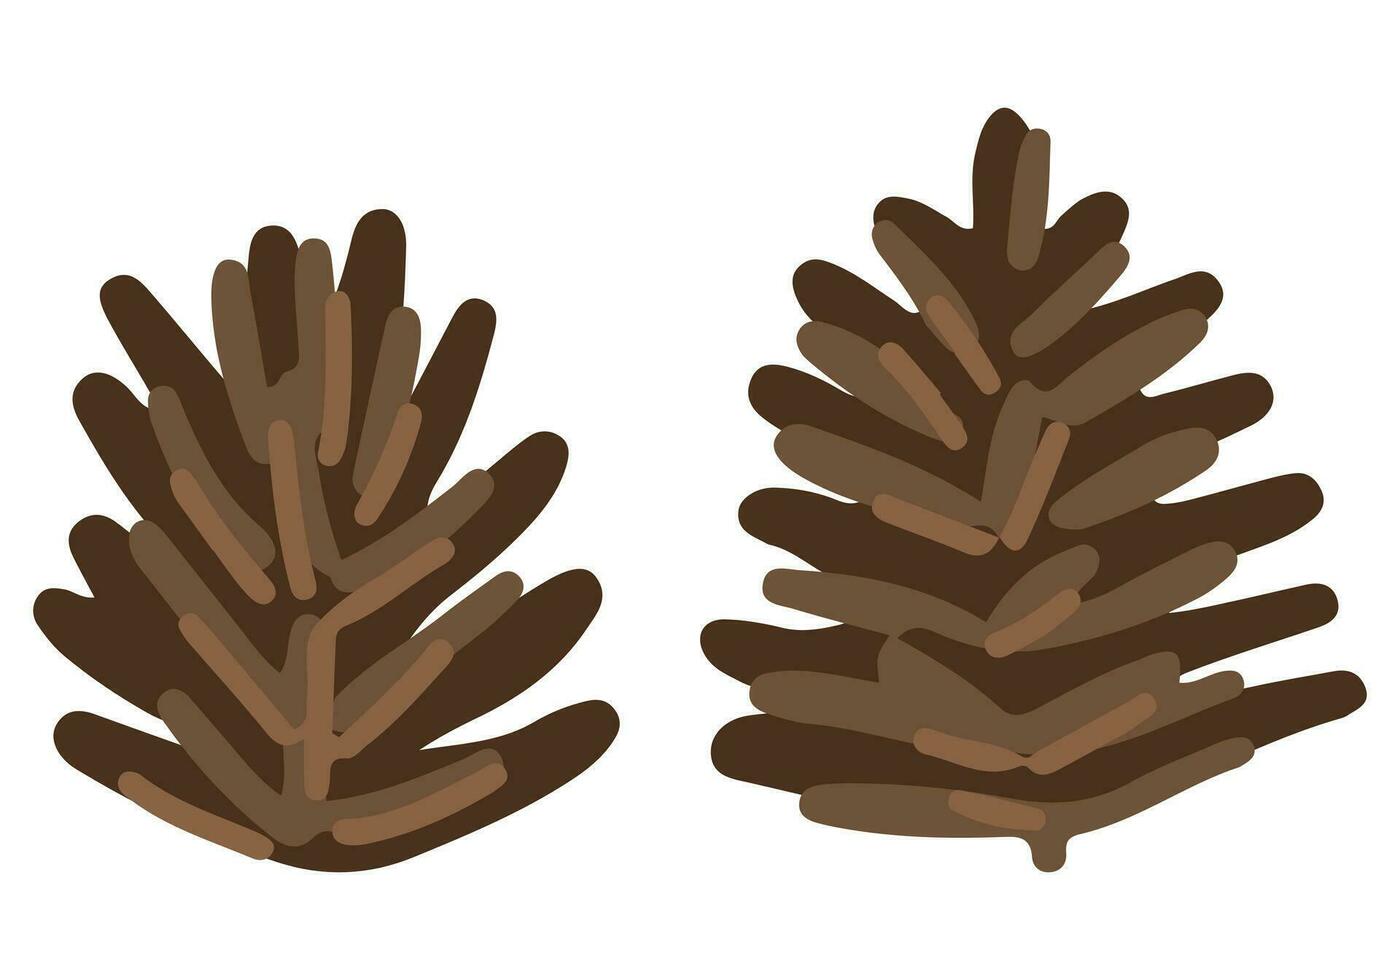 Two conifer cone. Colored cartoon doodle of winter attributes. Hand drawn vector illustration. Simple drawings isolated on white. Elements for Christmas design, print, sticker, card, decor, wrap.